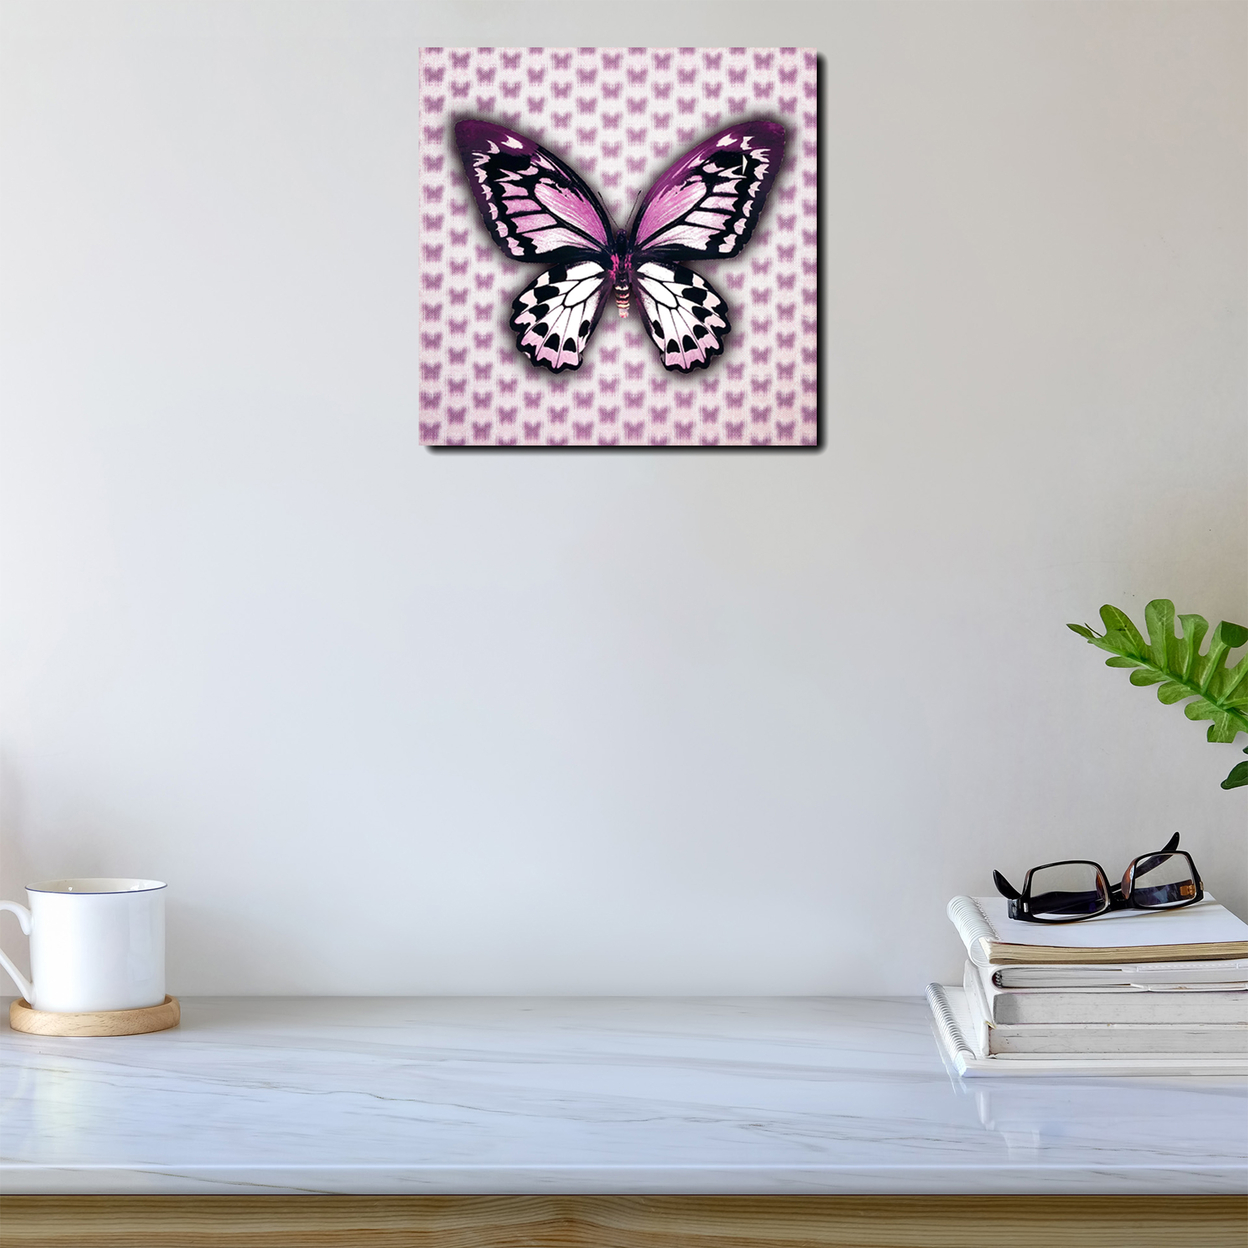 Matashi Multi-Dimensional Custom Made 5D Purple Butterfly Wall Art Print On Strong Polycarbonate Panel With Vibrant Colors (16x16 Inch)